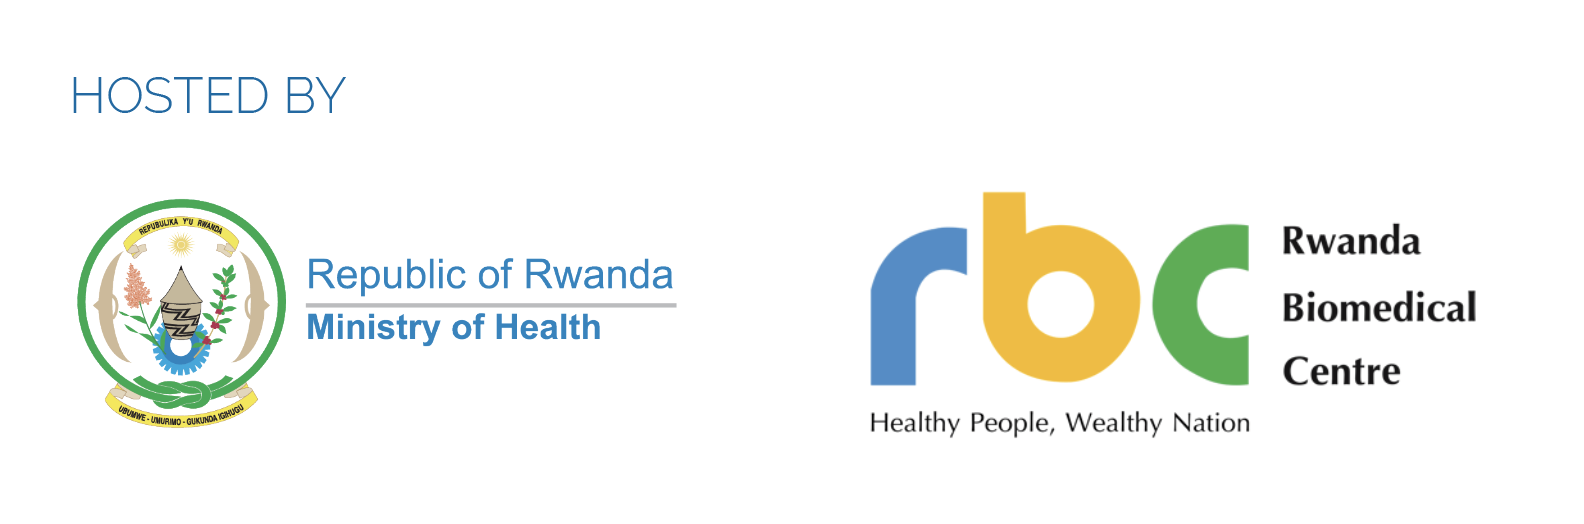 2023 IANPHI Annual Meeting hosted by the Rwanda Biomedical Centre